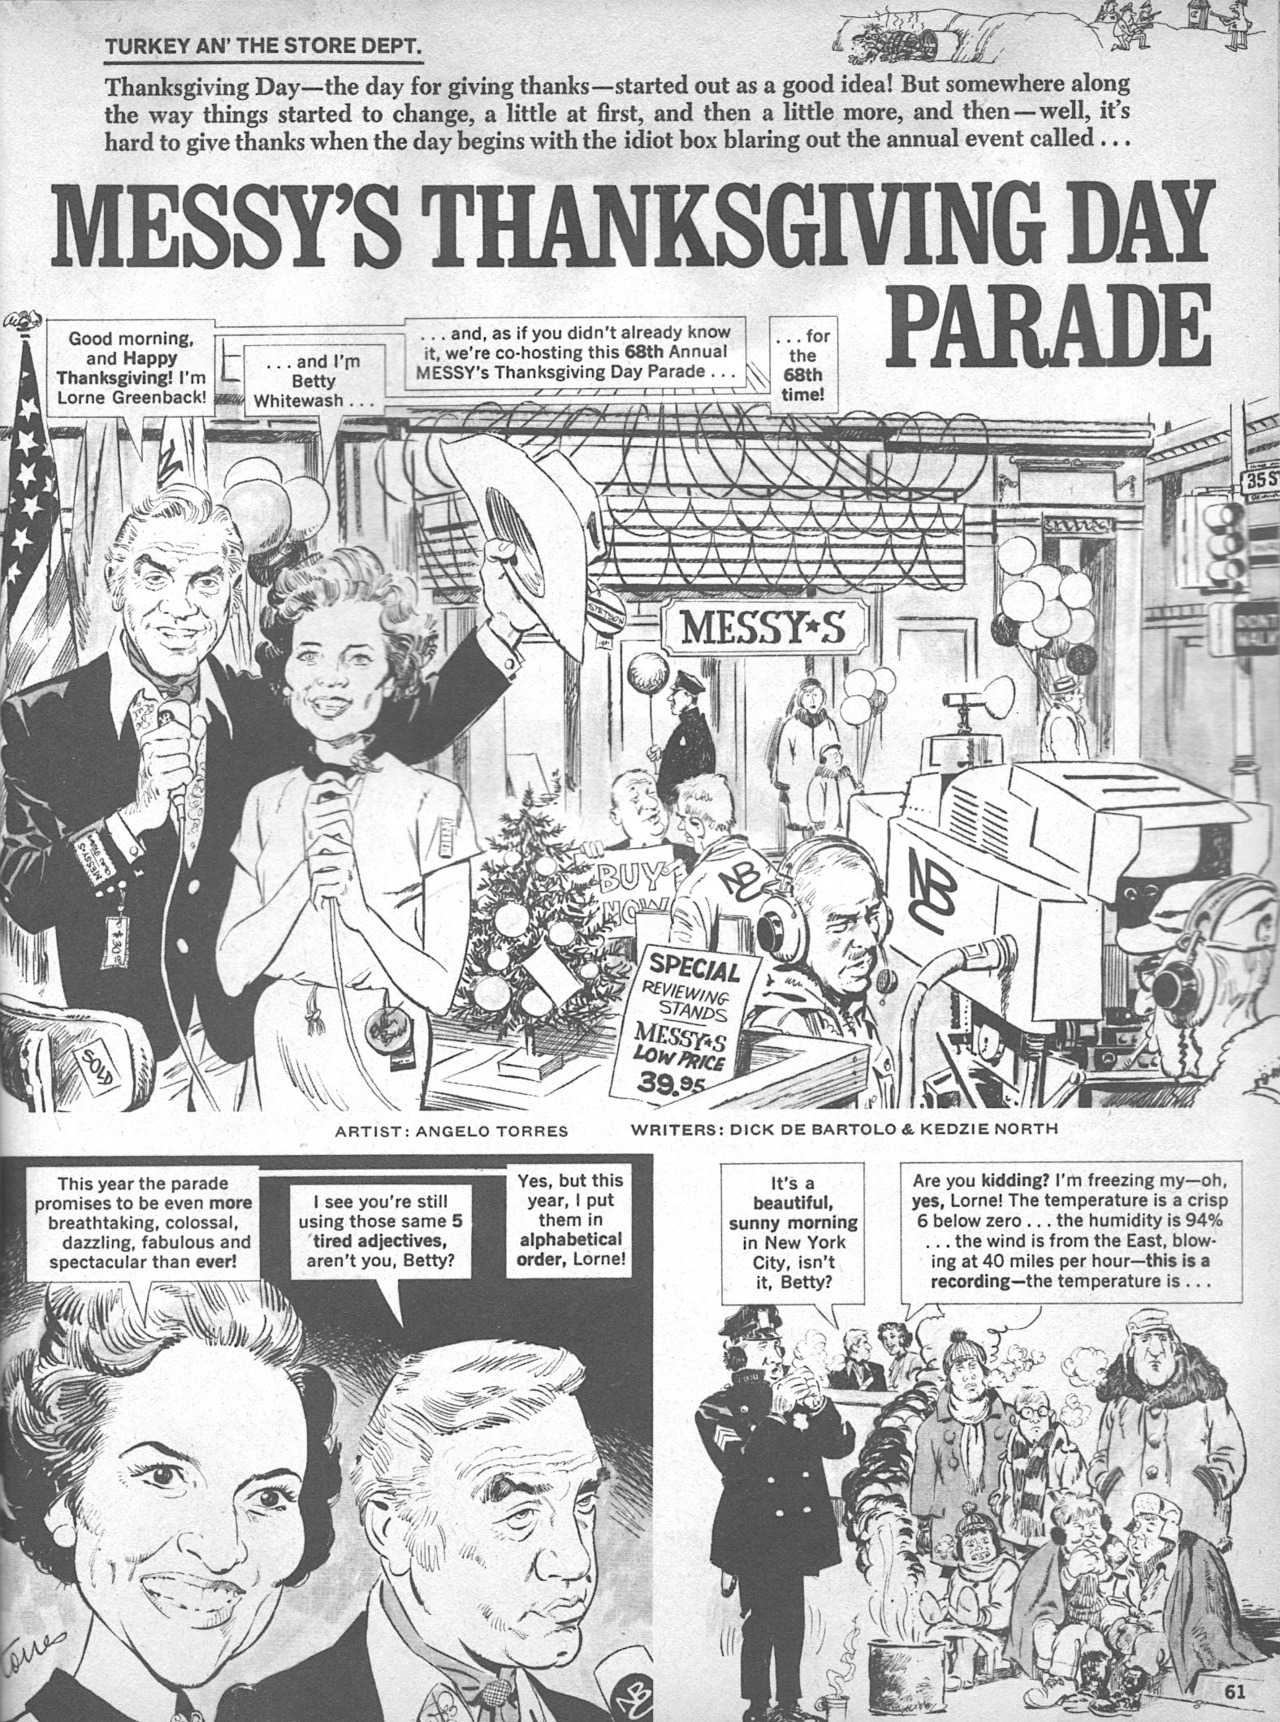 Messy’s Thanksgiving Day Parade